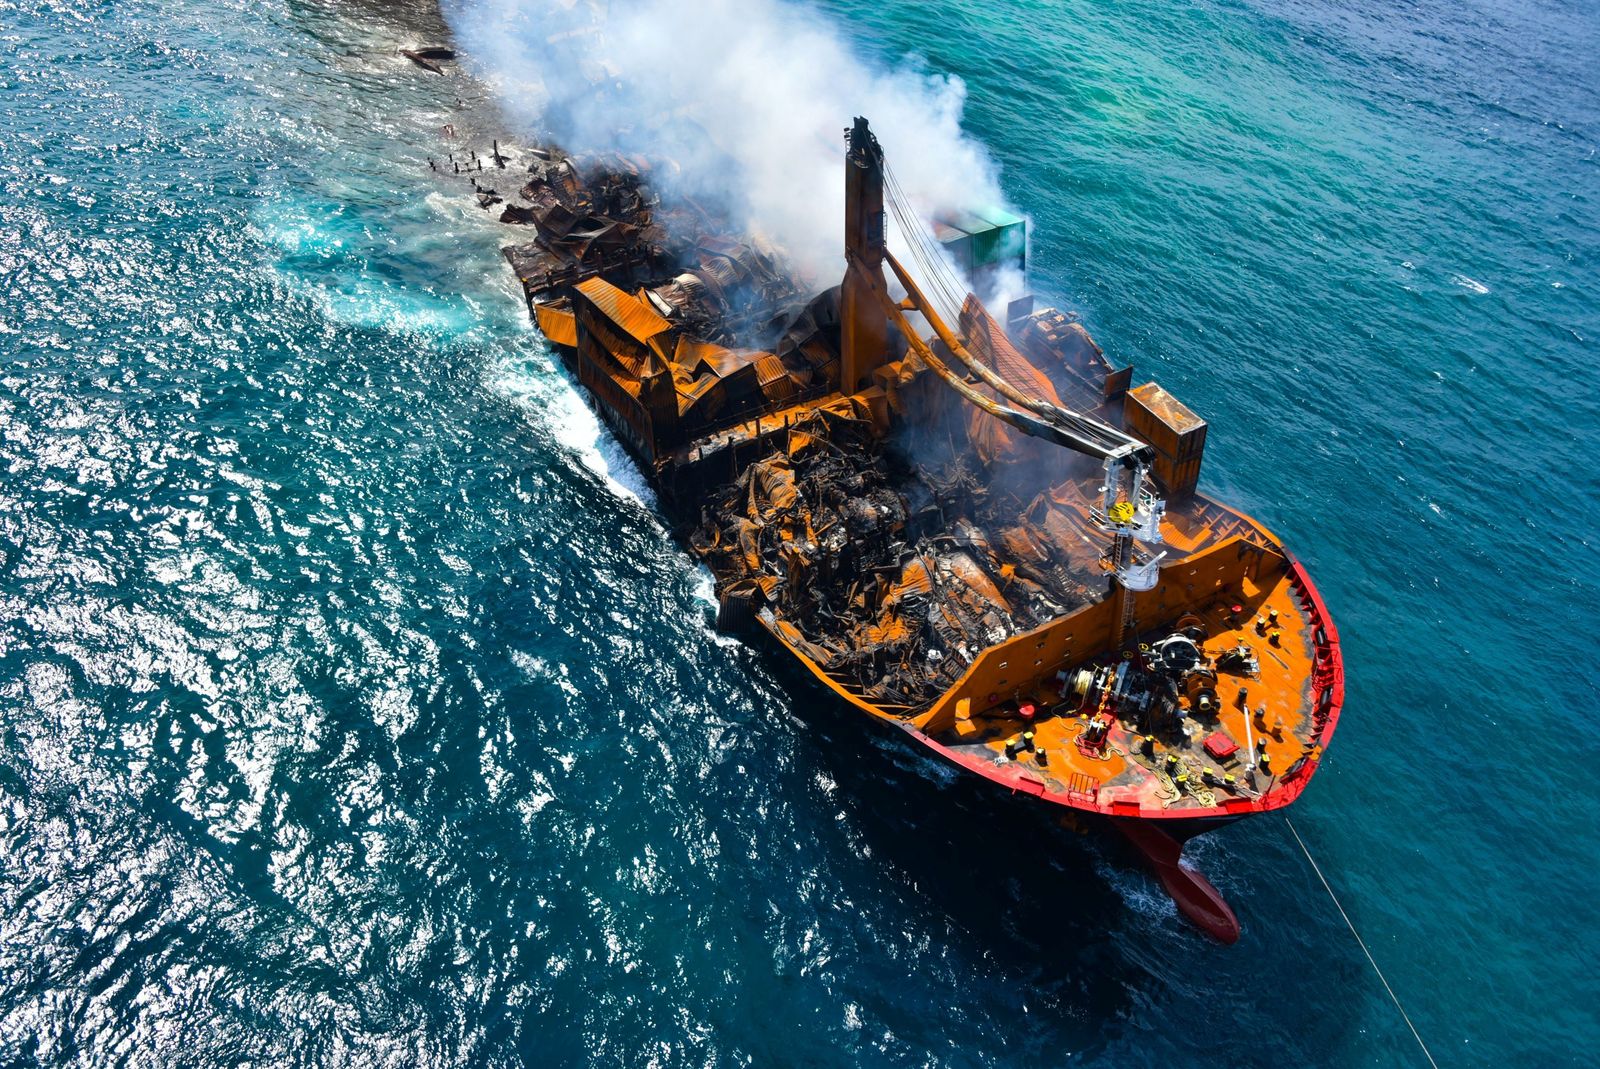 MV X-Press Pearl vessel sinks as its towed into deep sea off the Colombo Harbour - via REUTERS